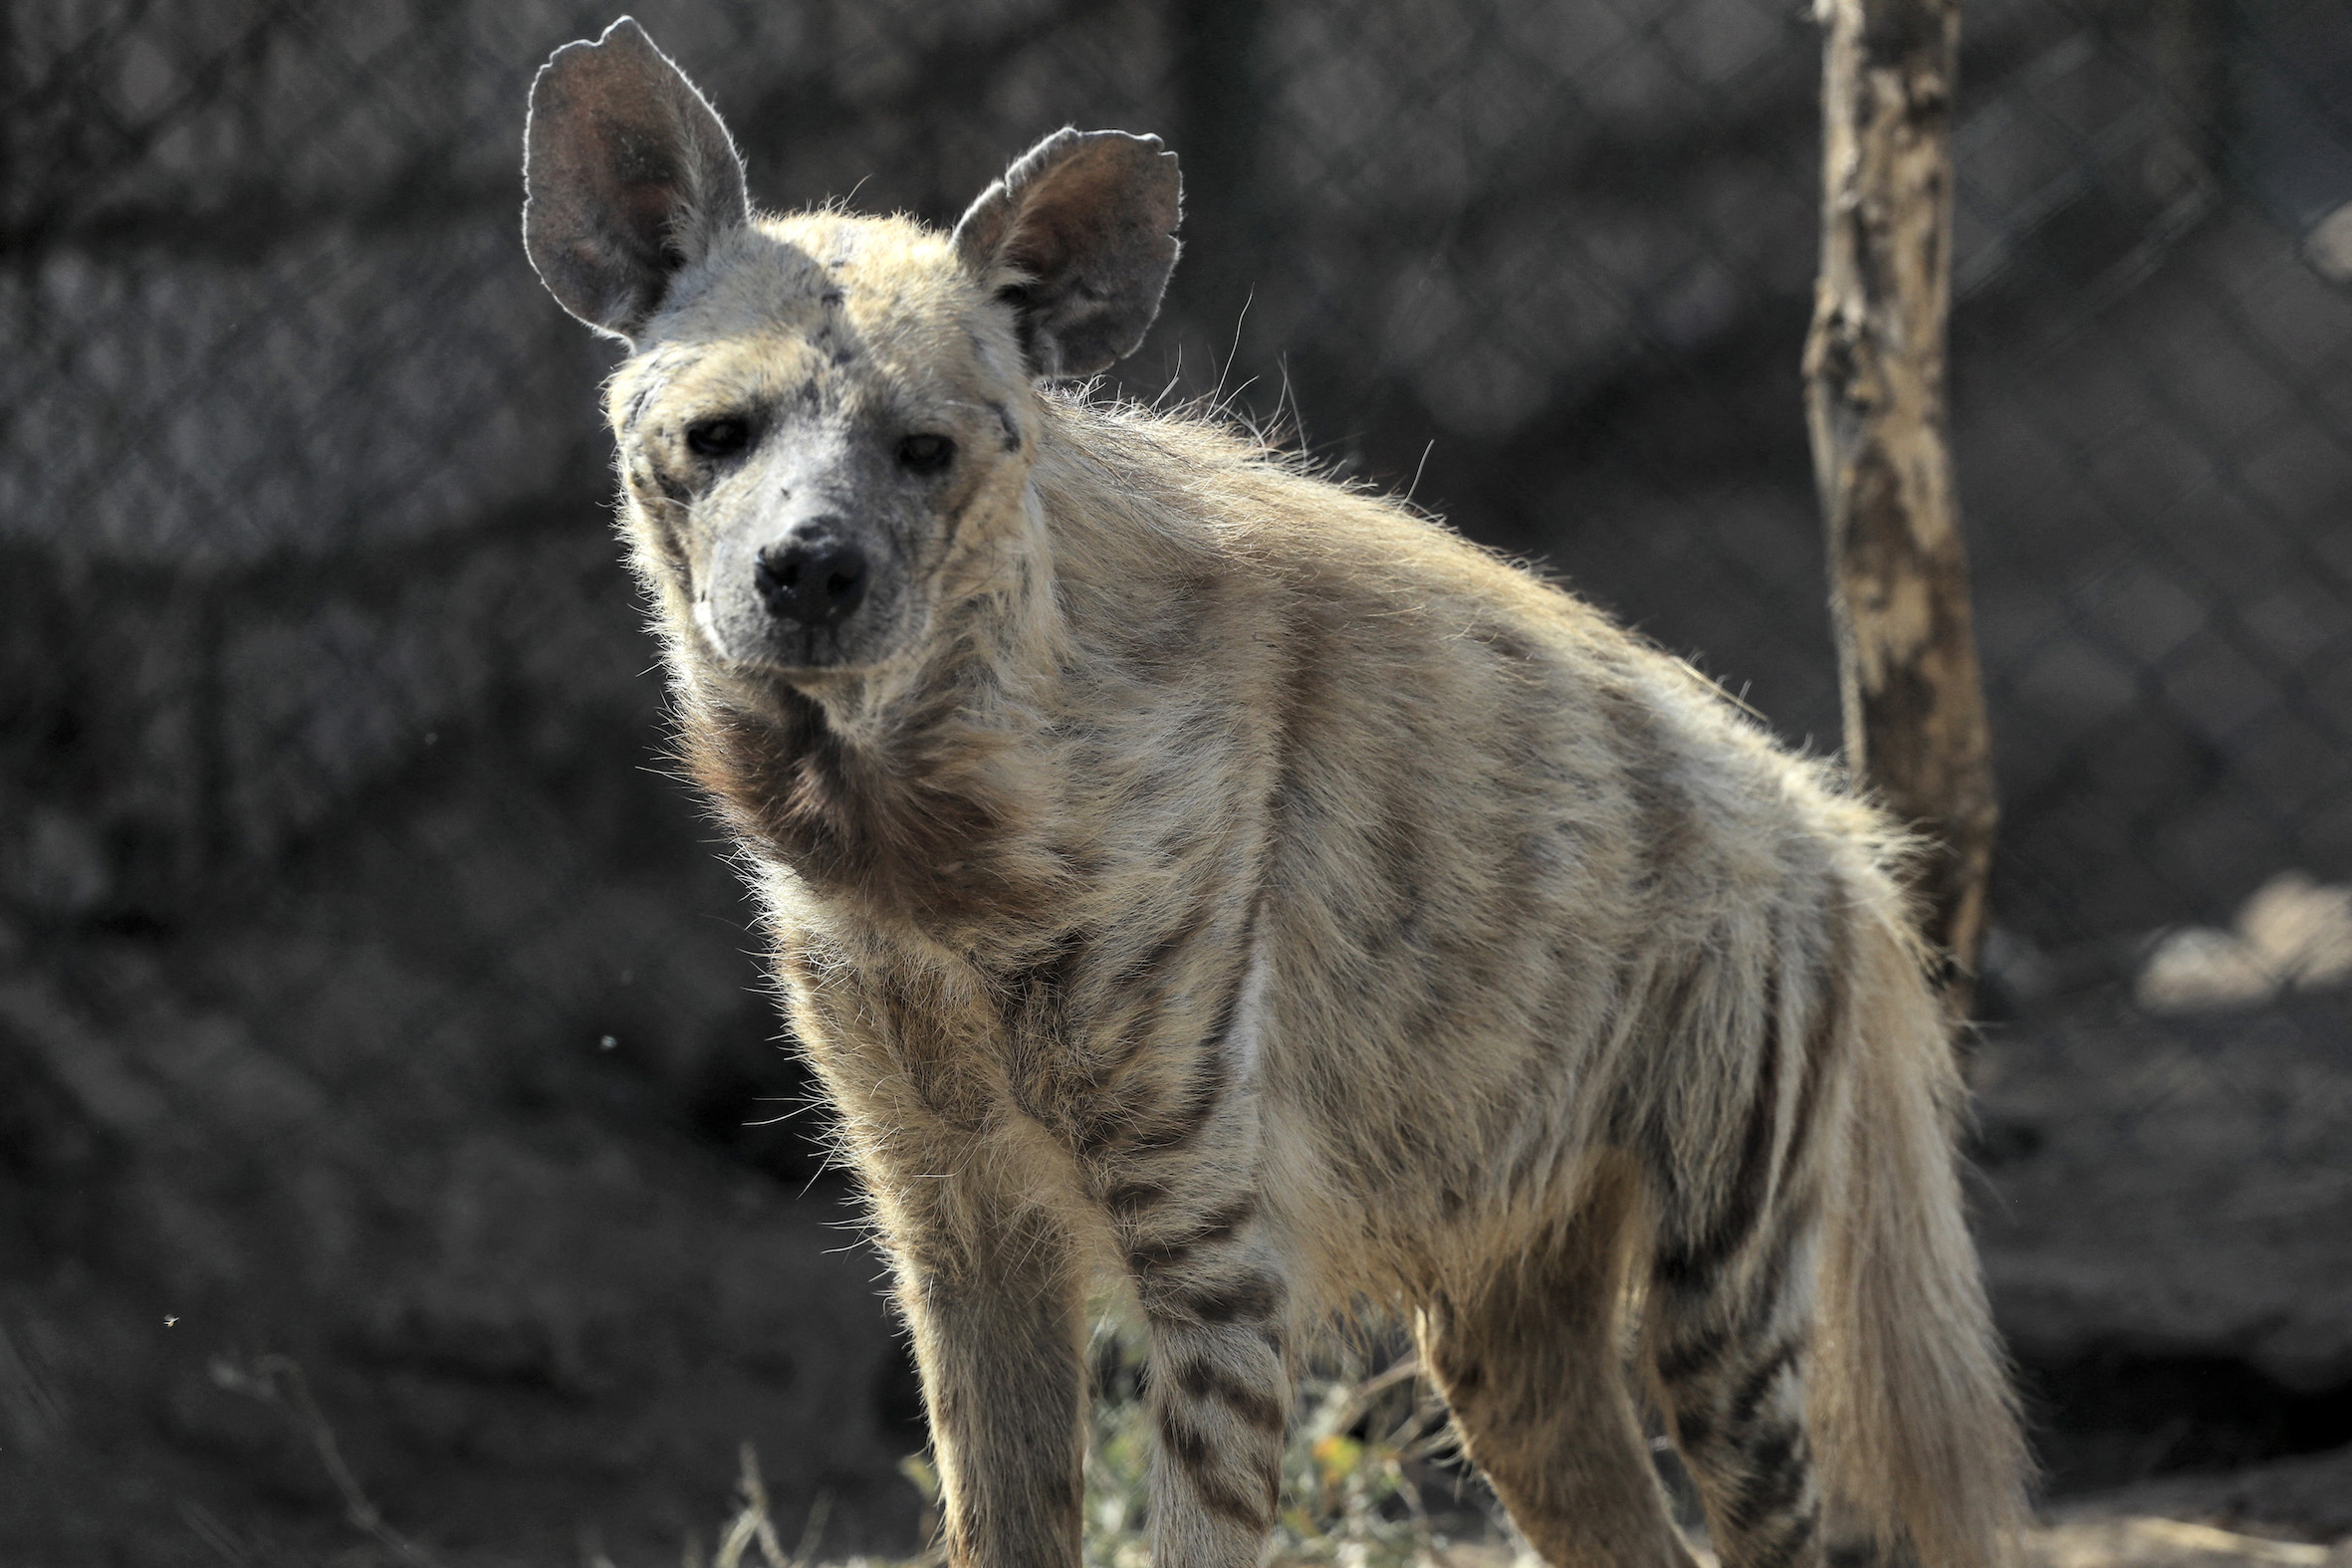 The International Union for Conservation of Nature lists striped hyenas as near-threatened with an estimated under 10,000 mature individuals  (AFP/ Ashraf Shazly)